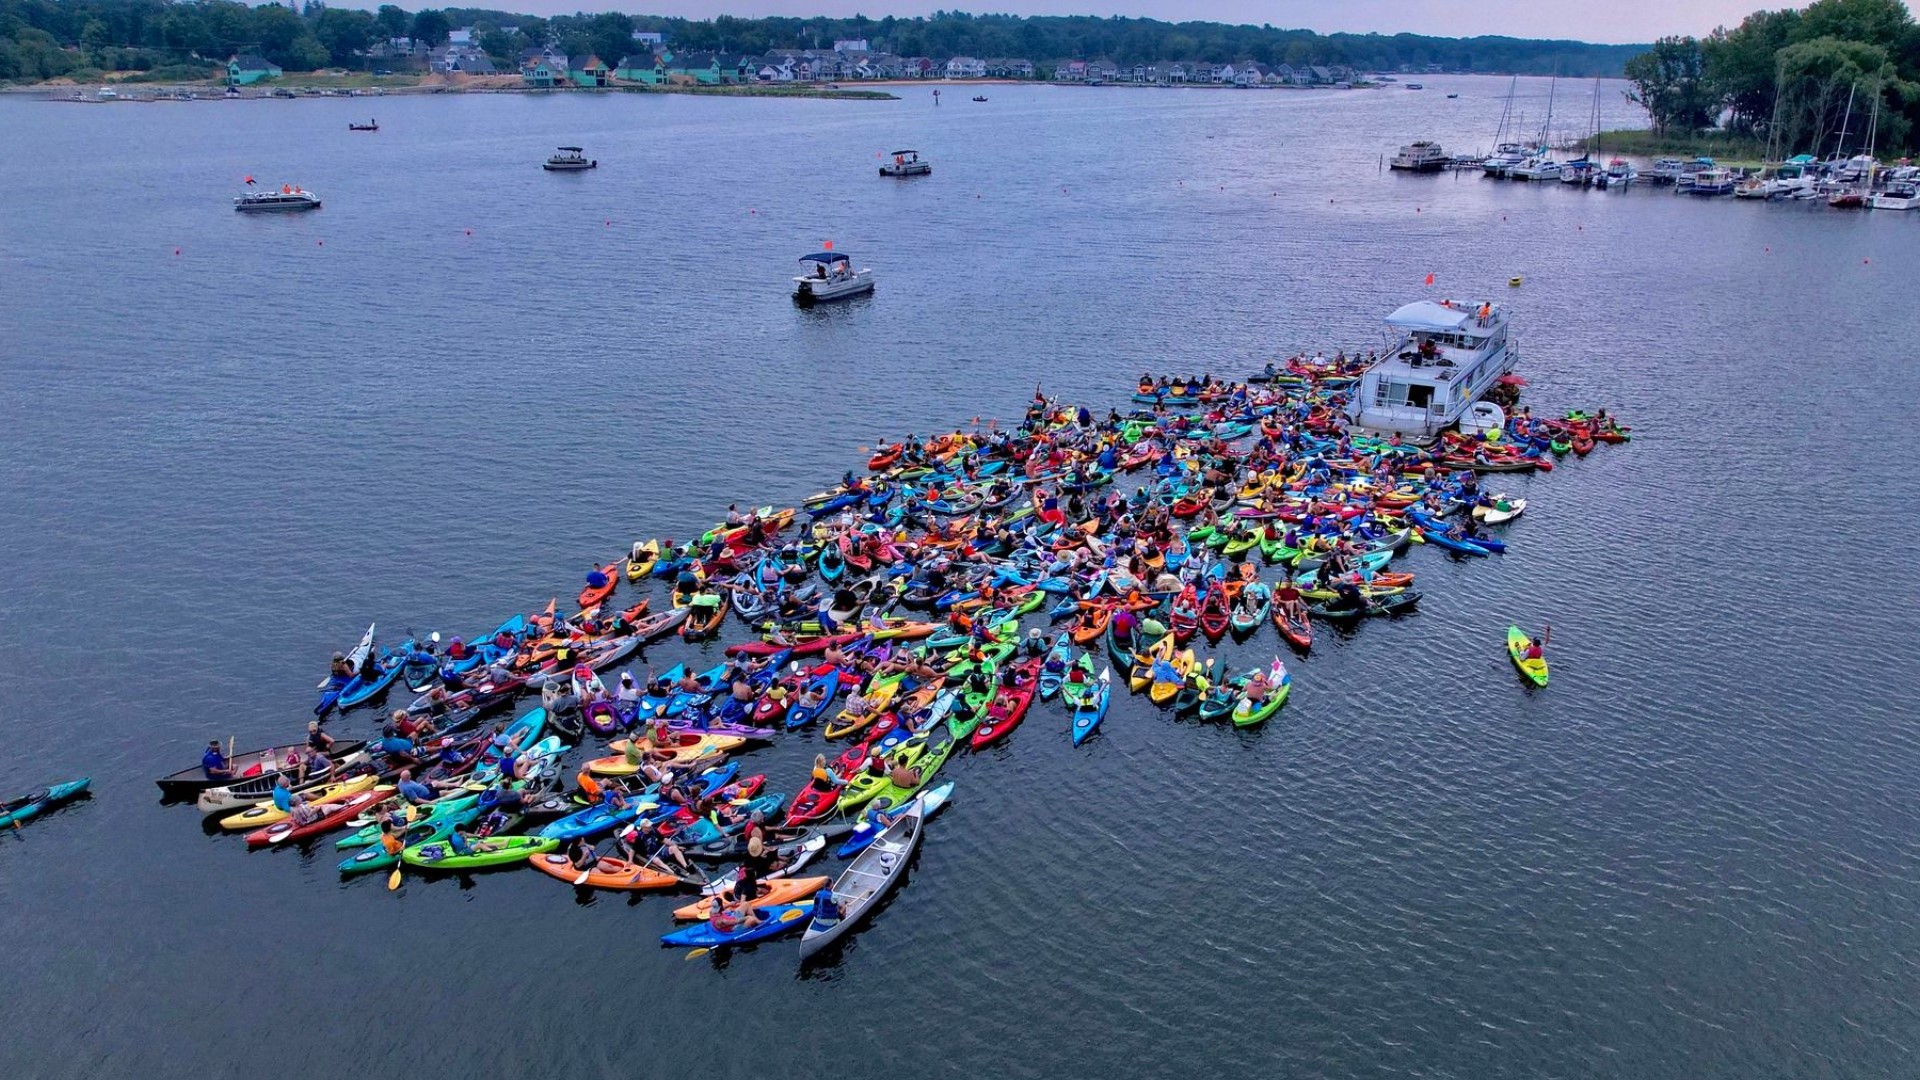 Dozens of kayaks joined together to form a flotilla in White Lake on August 28, Sunday afternoon.